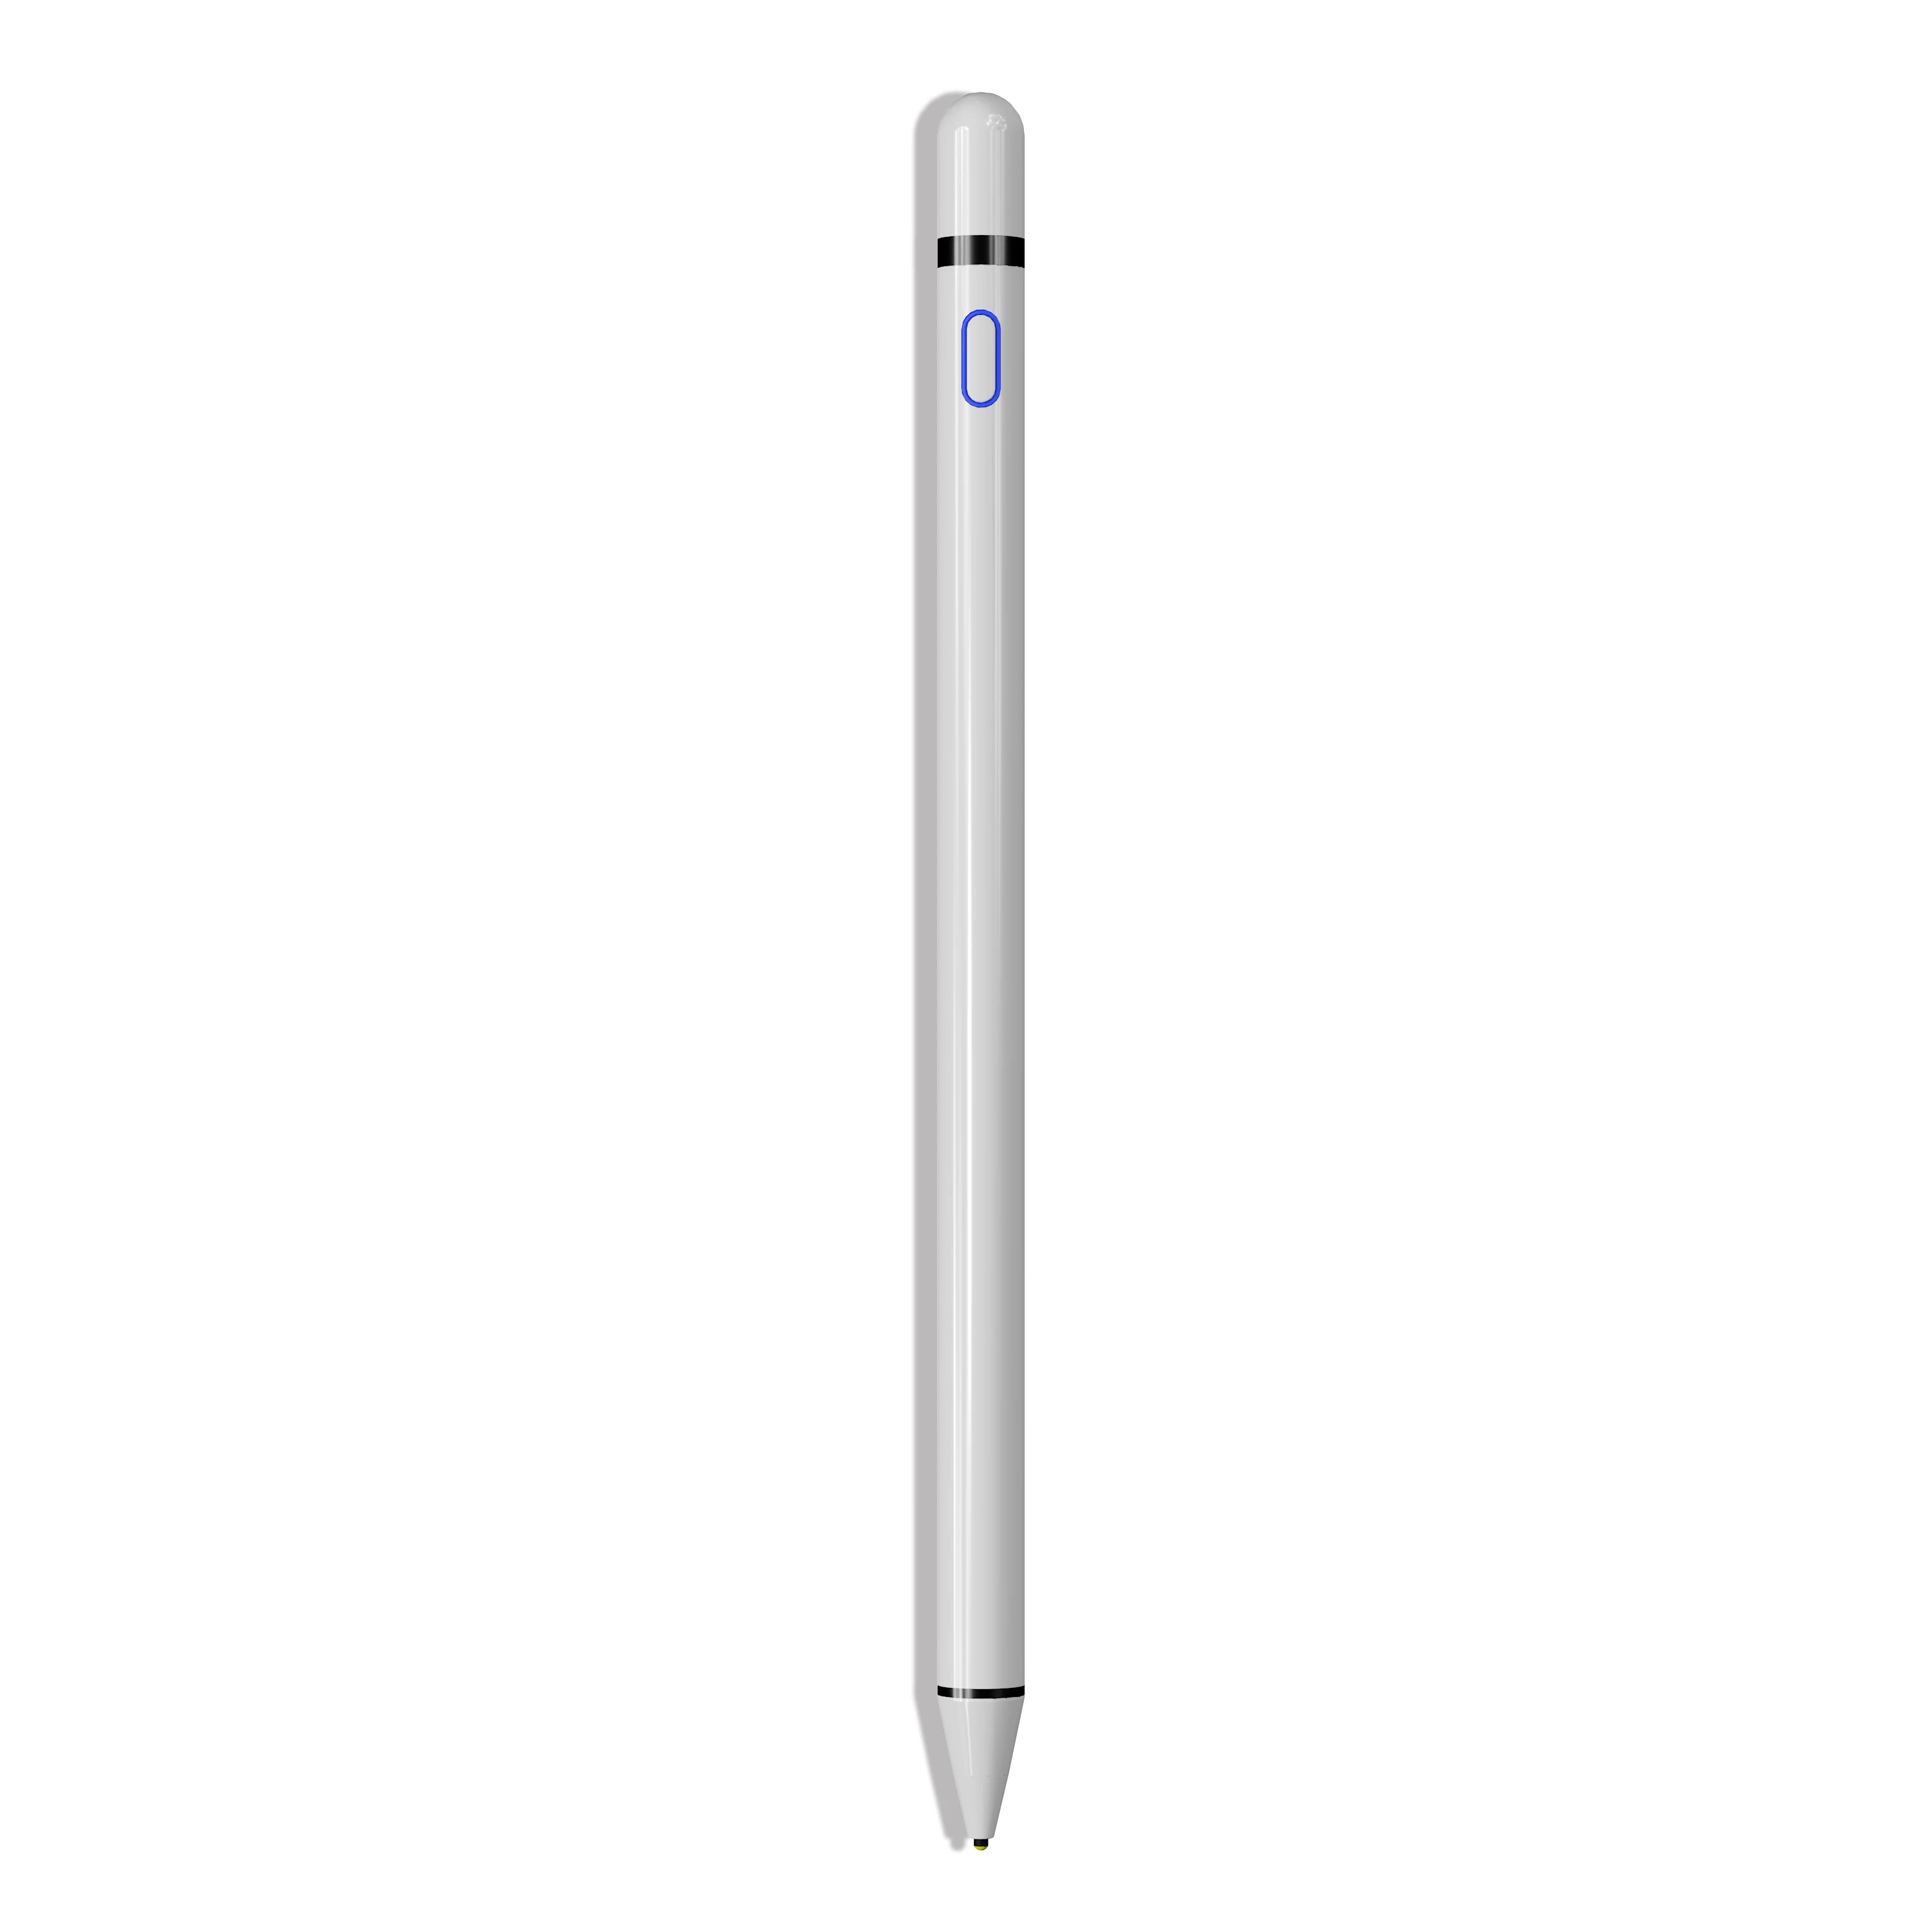 

Hot Sale Fine Point Digital Drawing Pencil Upgraded Active Capacitive Stylus Pen For Ipad Tablet Phone Laptop, White